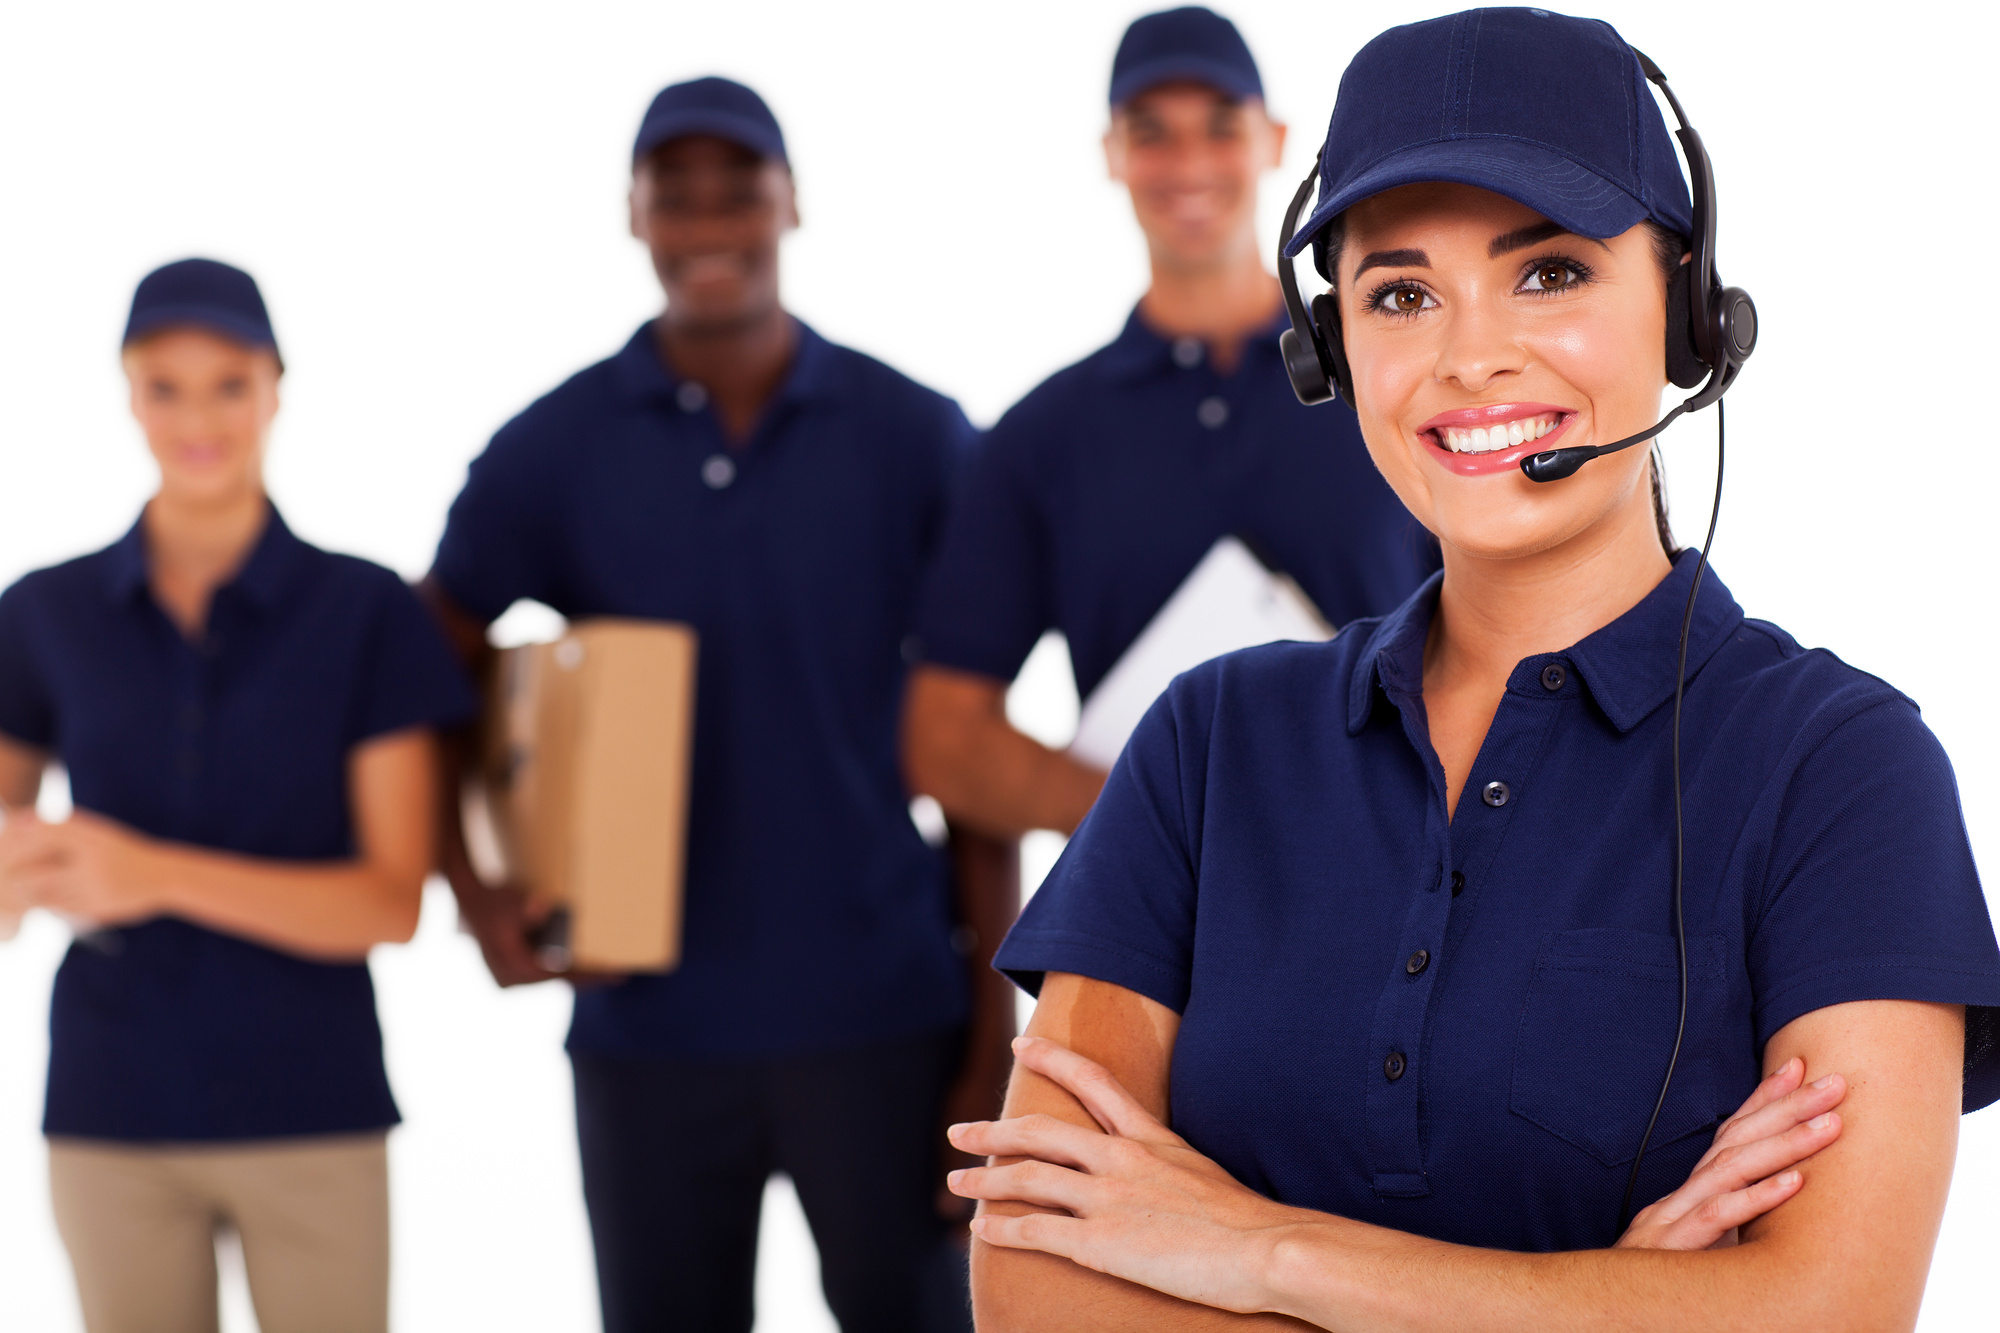 How to Make Sure Your Courier Service Protects Your Business